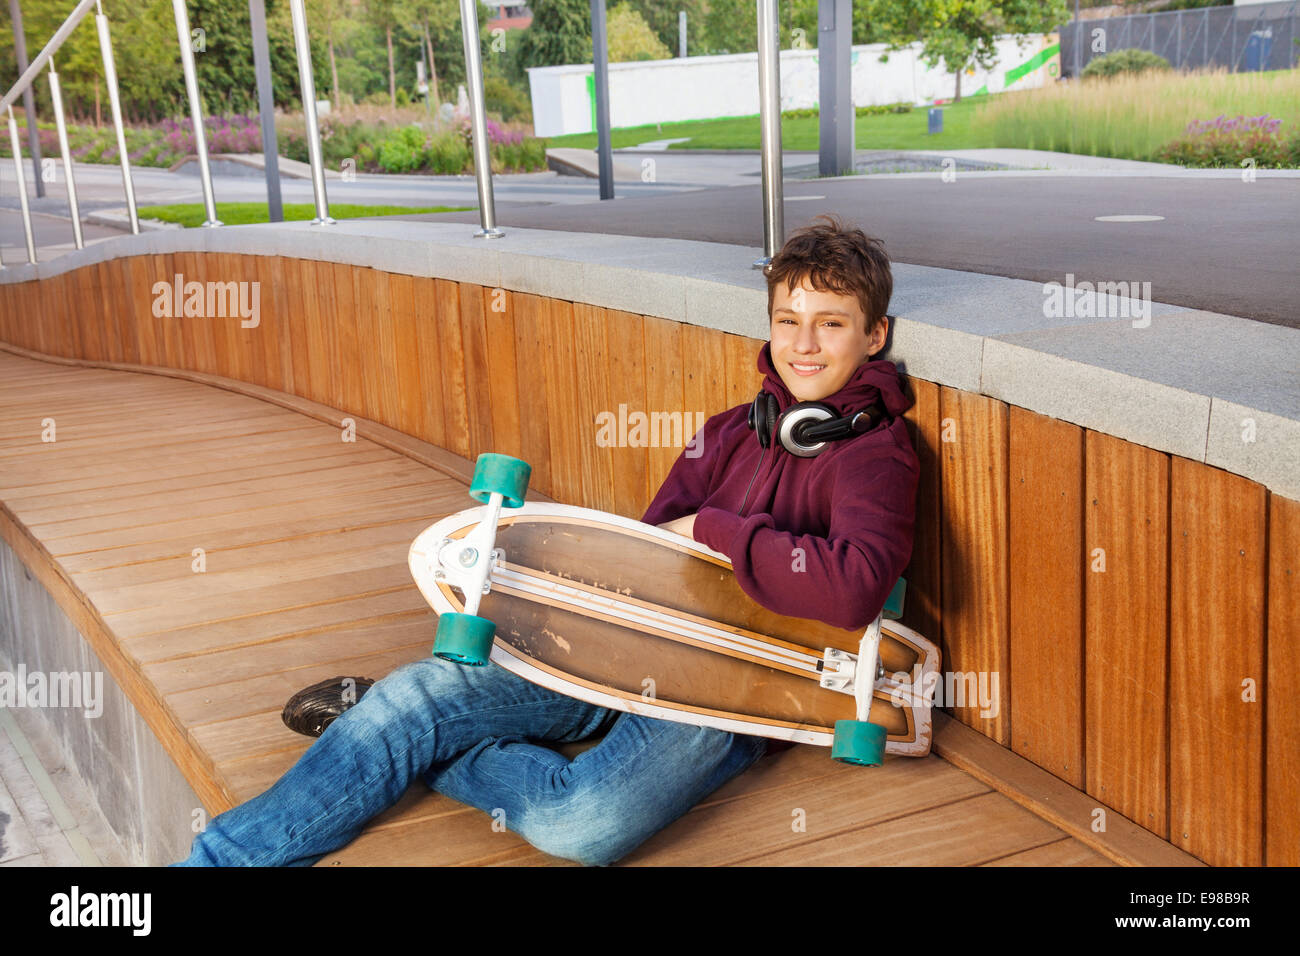 Boy with headphones relaxes and holds skateboard Stock Photo